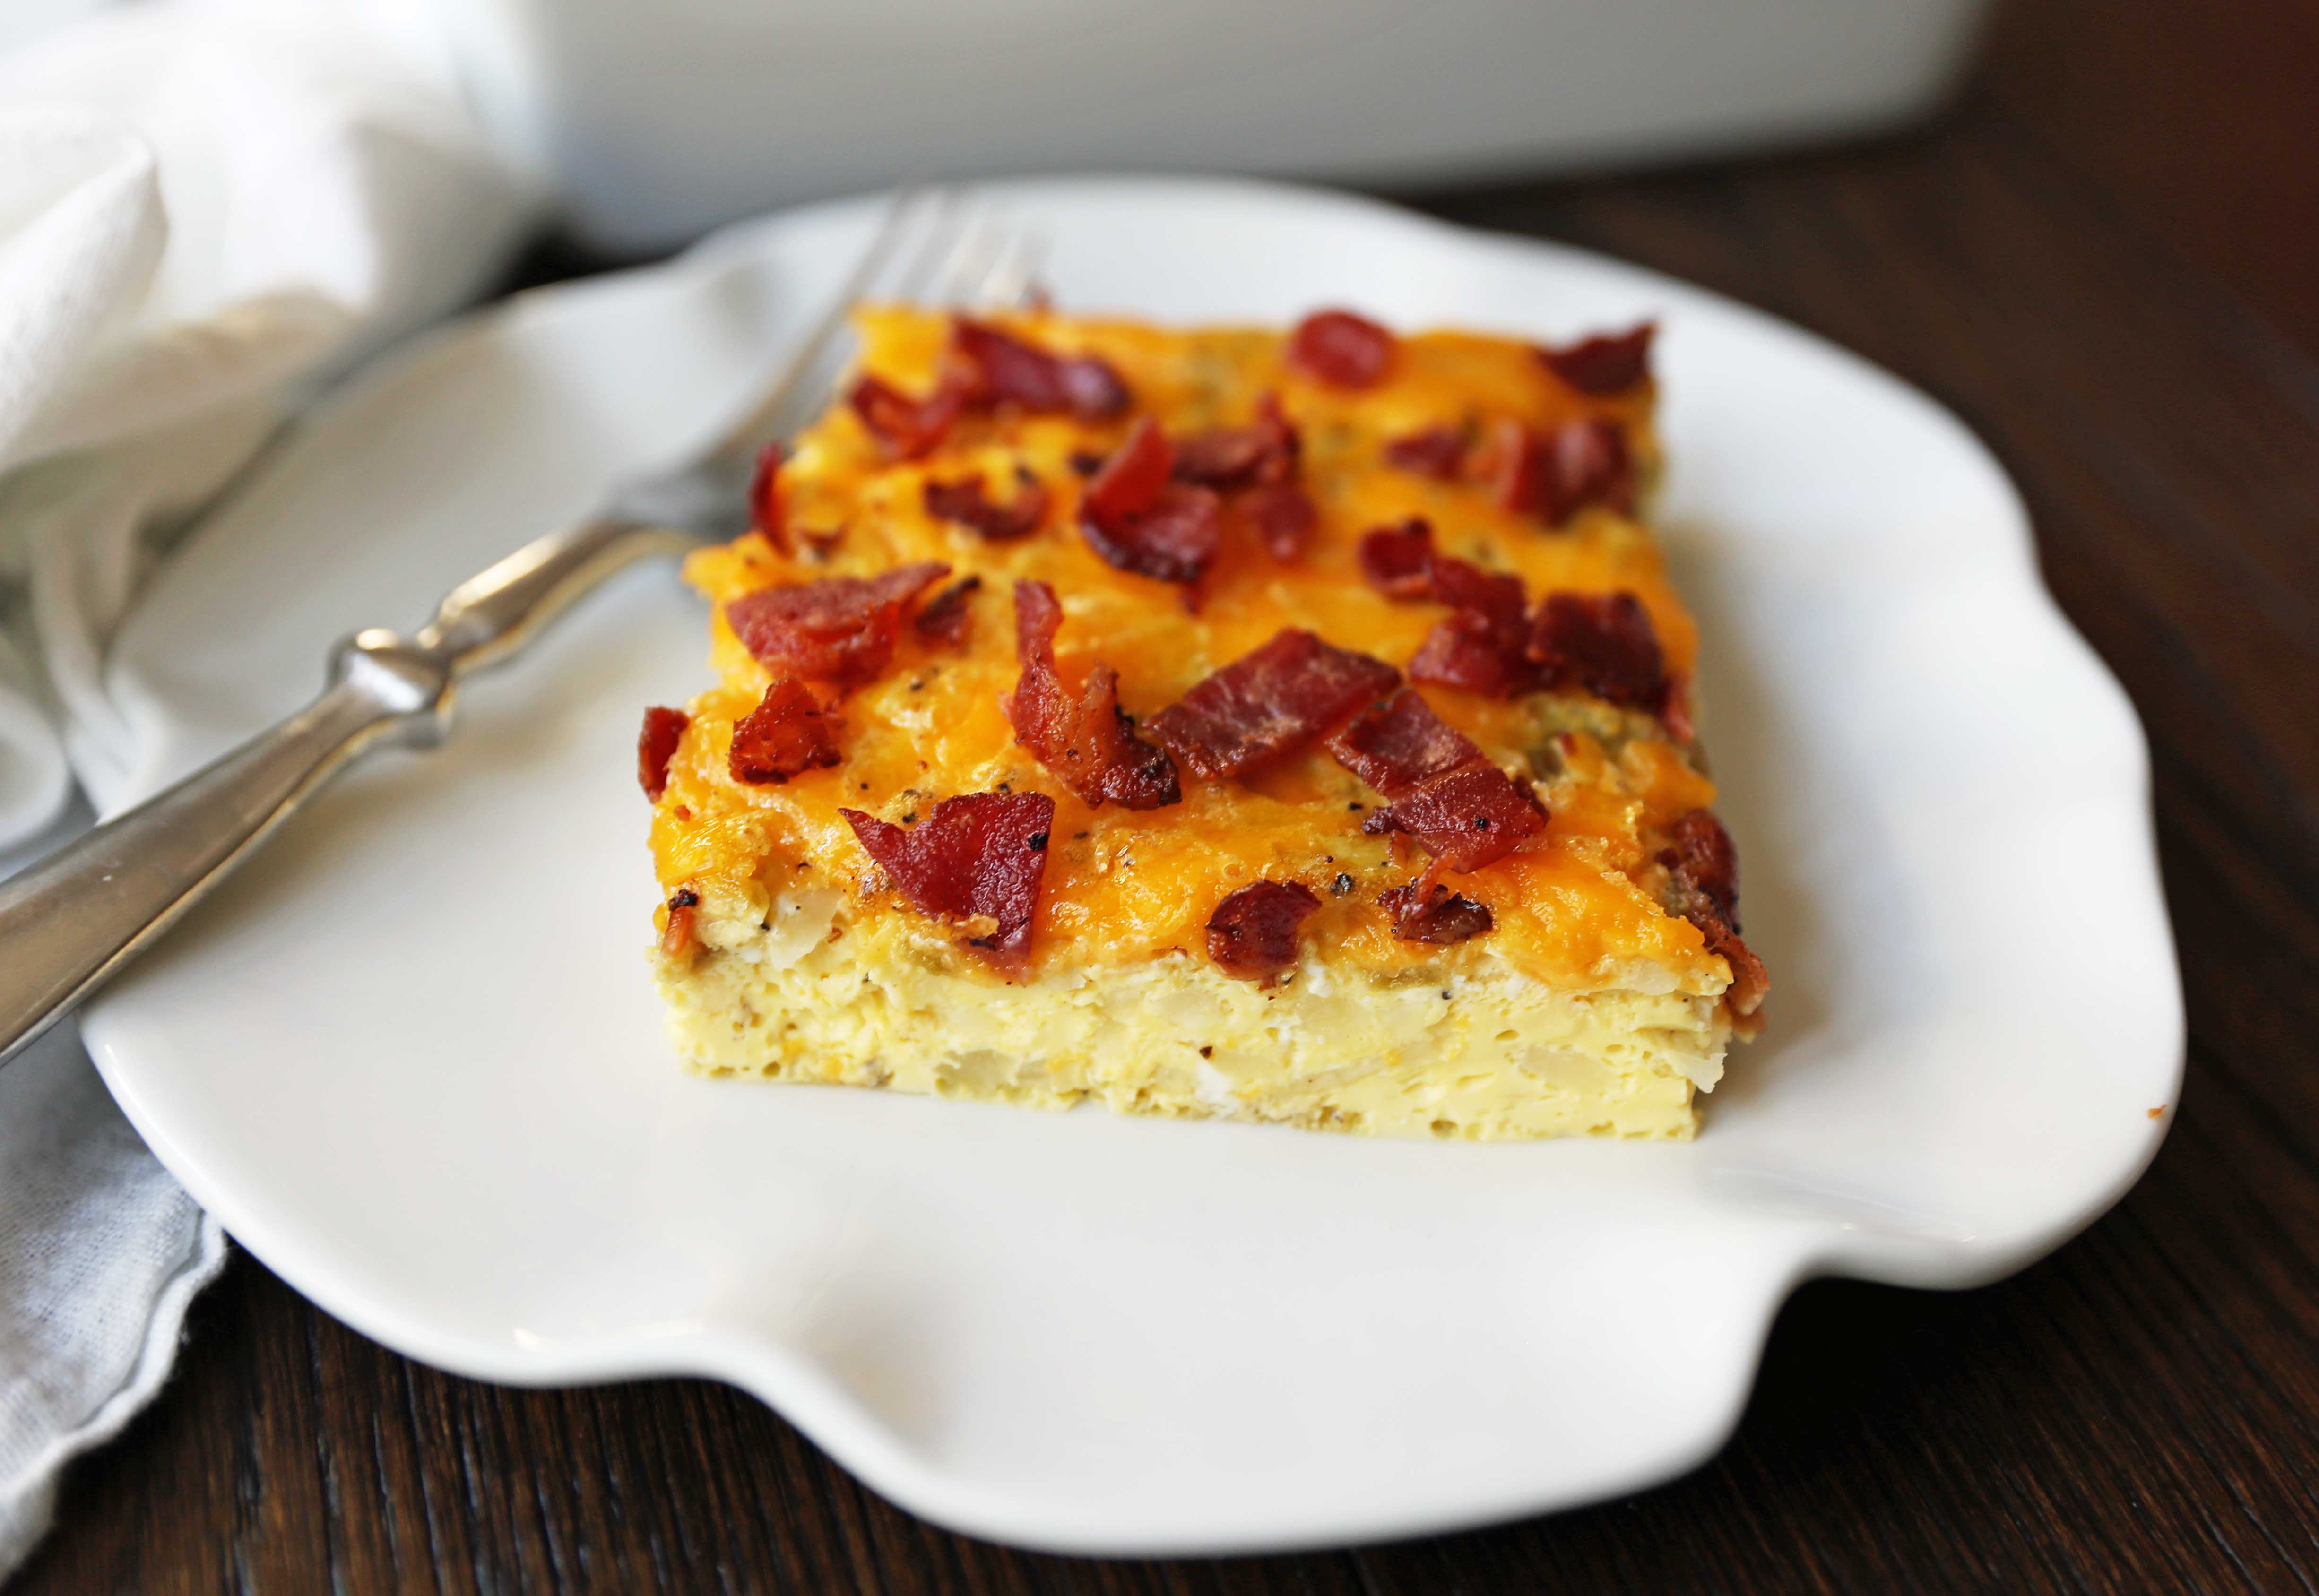 Bacon, Cheddar, and Egg Casserole